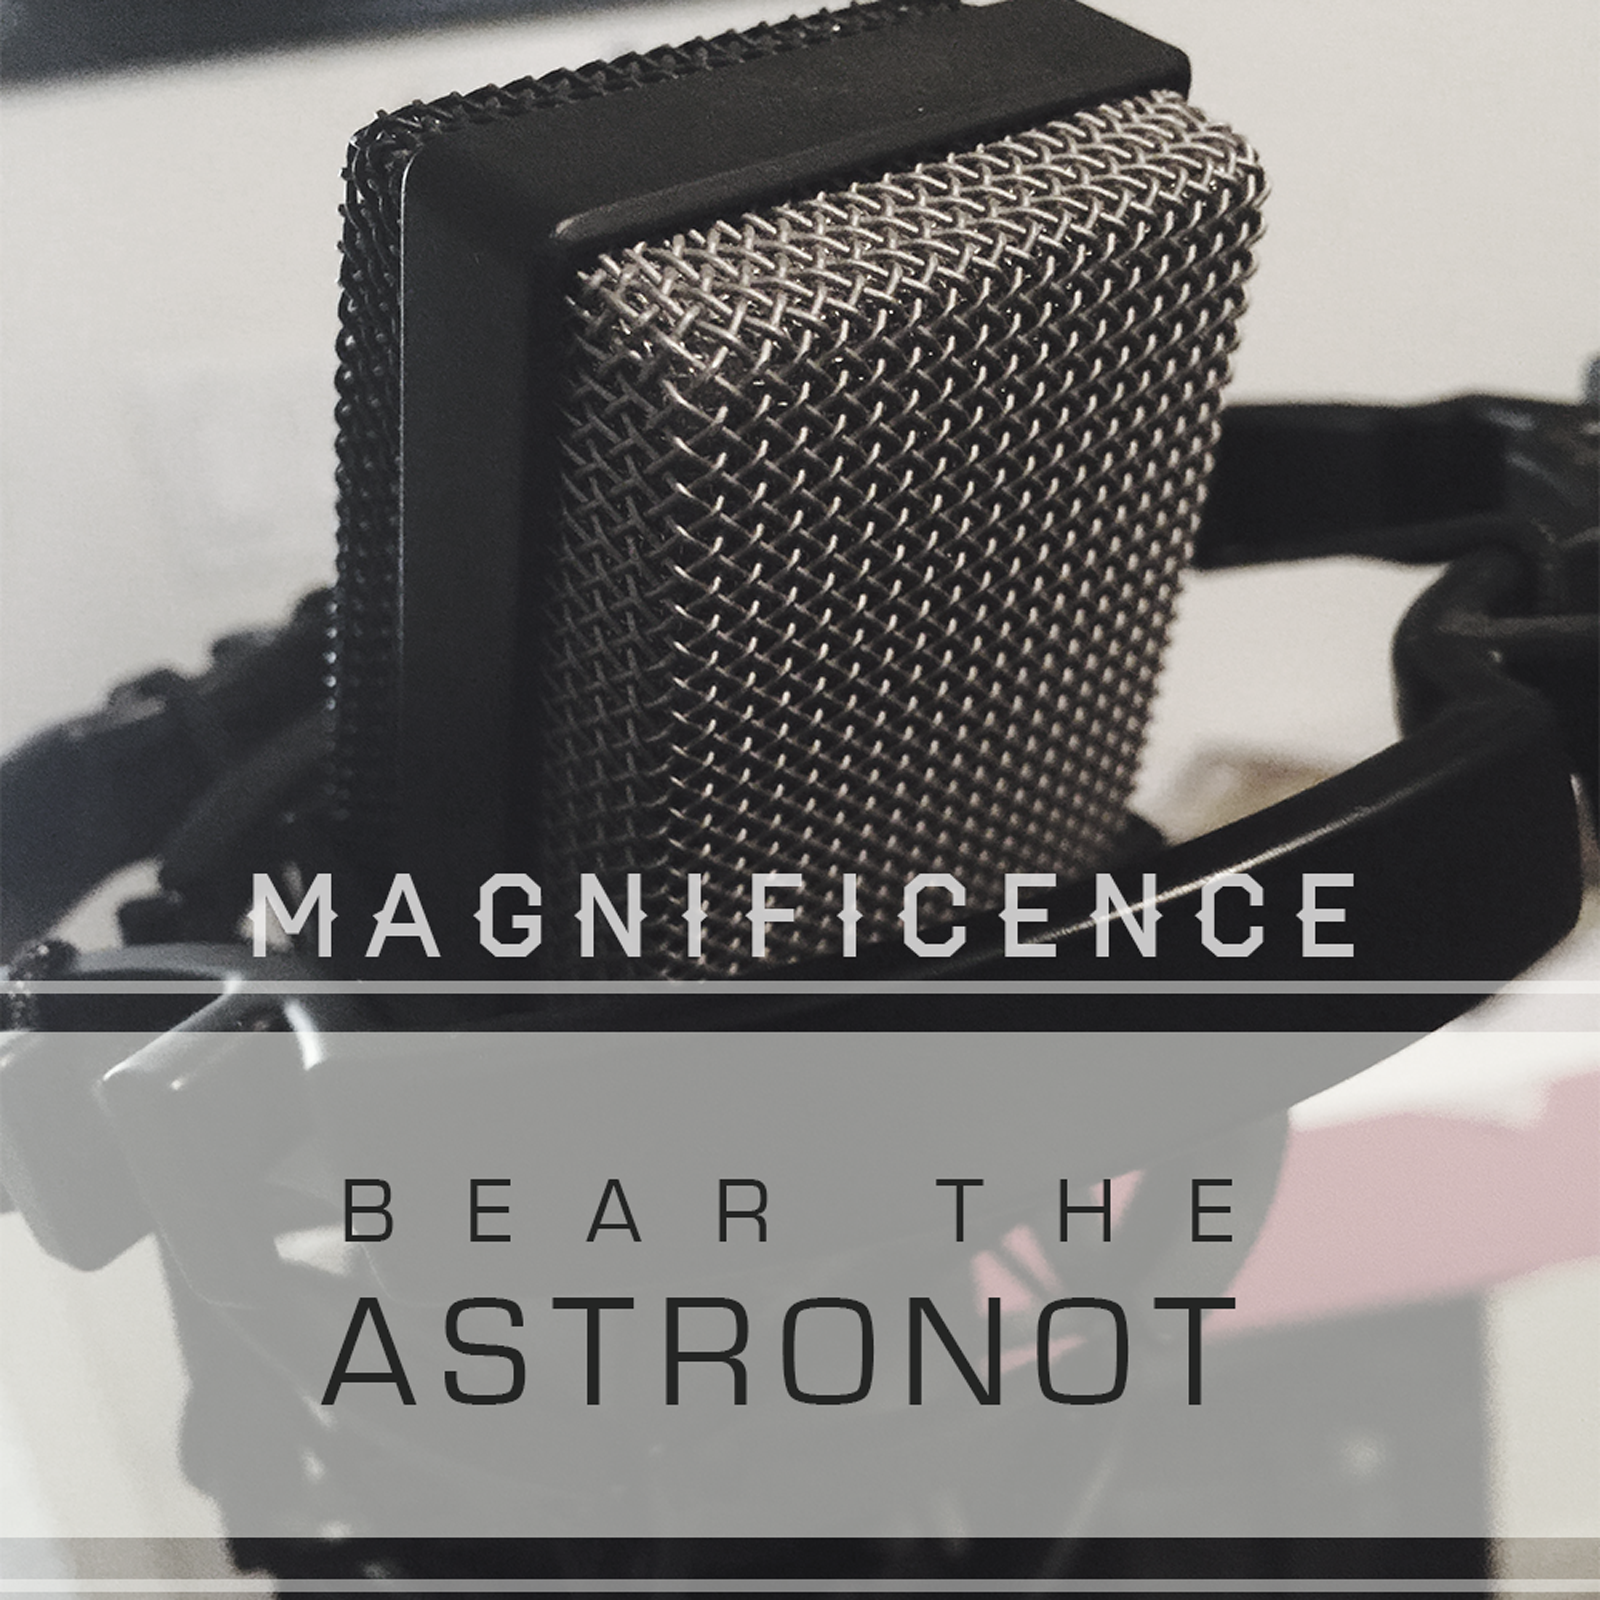 Magnificence-Bear-the-Astronot-single-cover